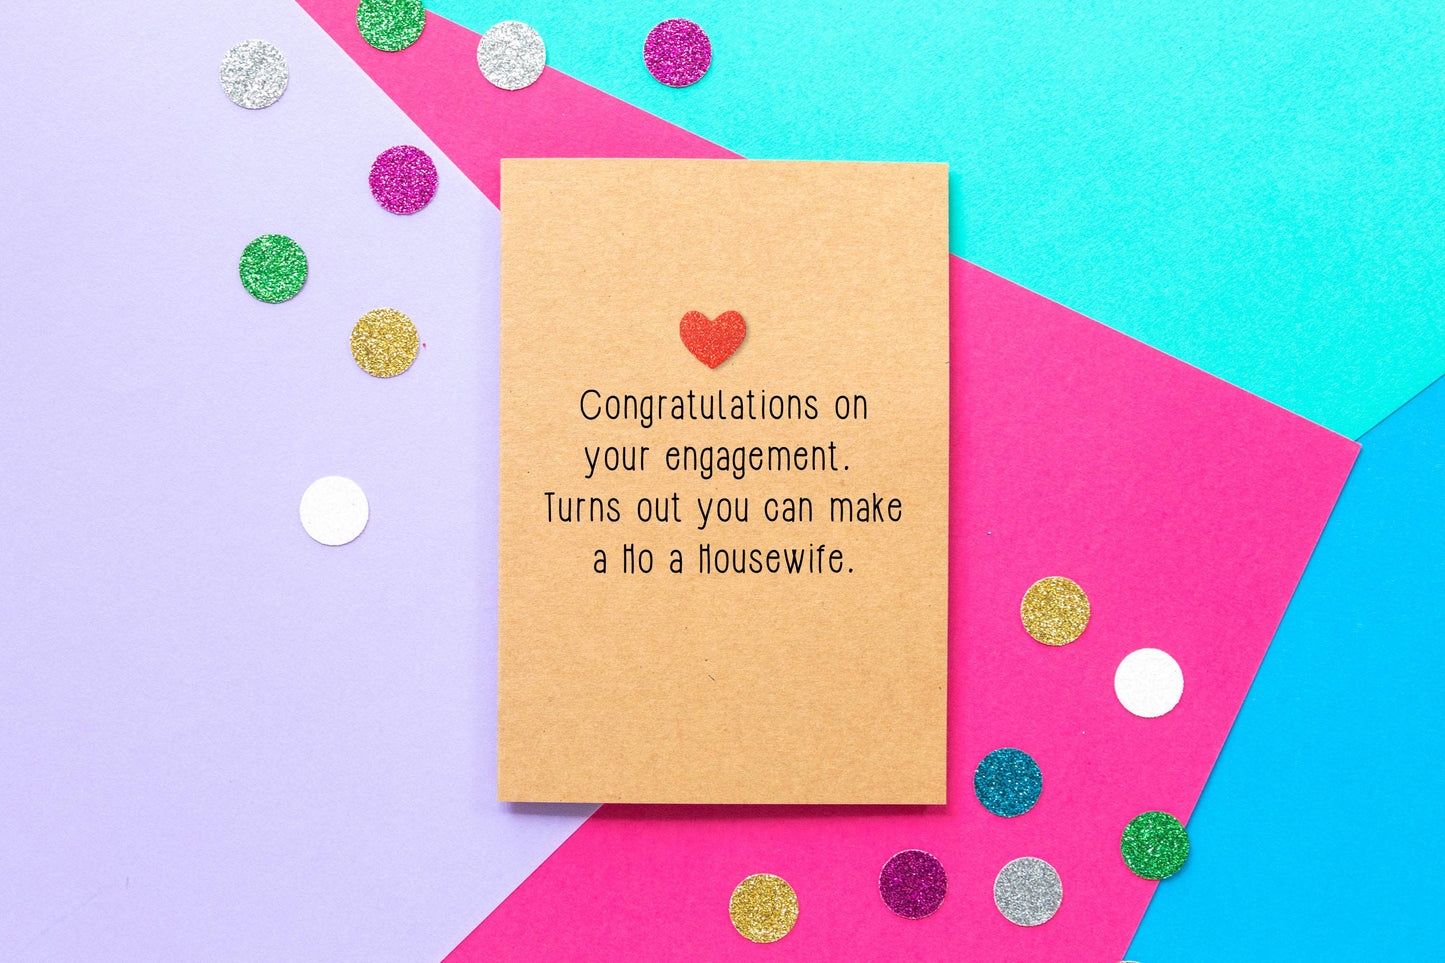 Funny Engagement Card - Make a ho a housewife